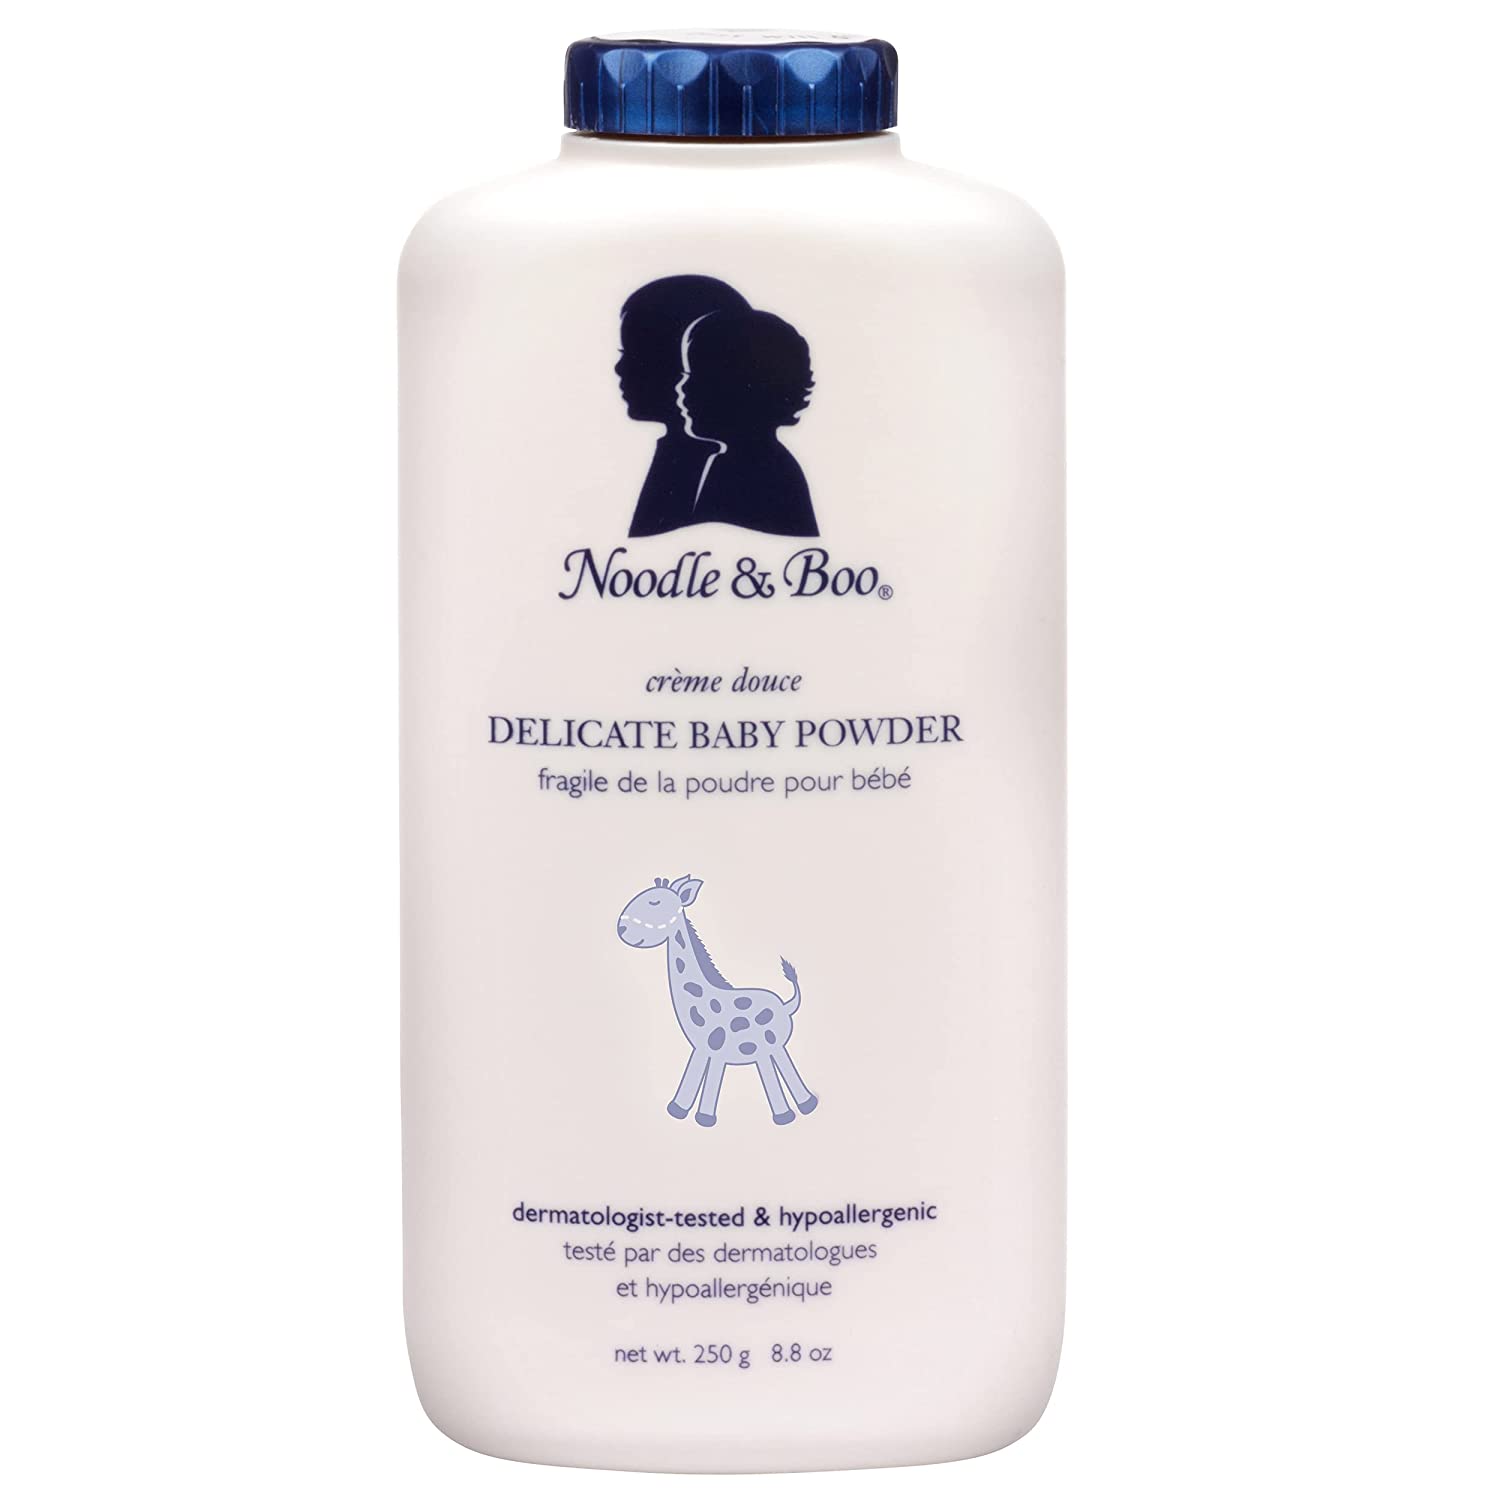 Noodle & Boo Delicate Baby Powder, Natural, Talc Free, 8.8 oz